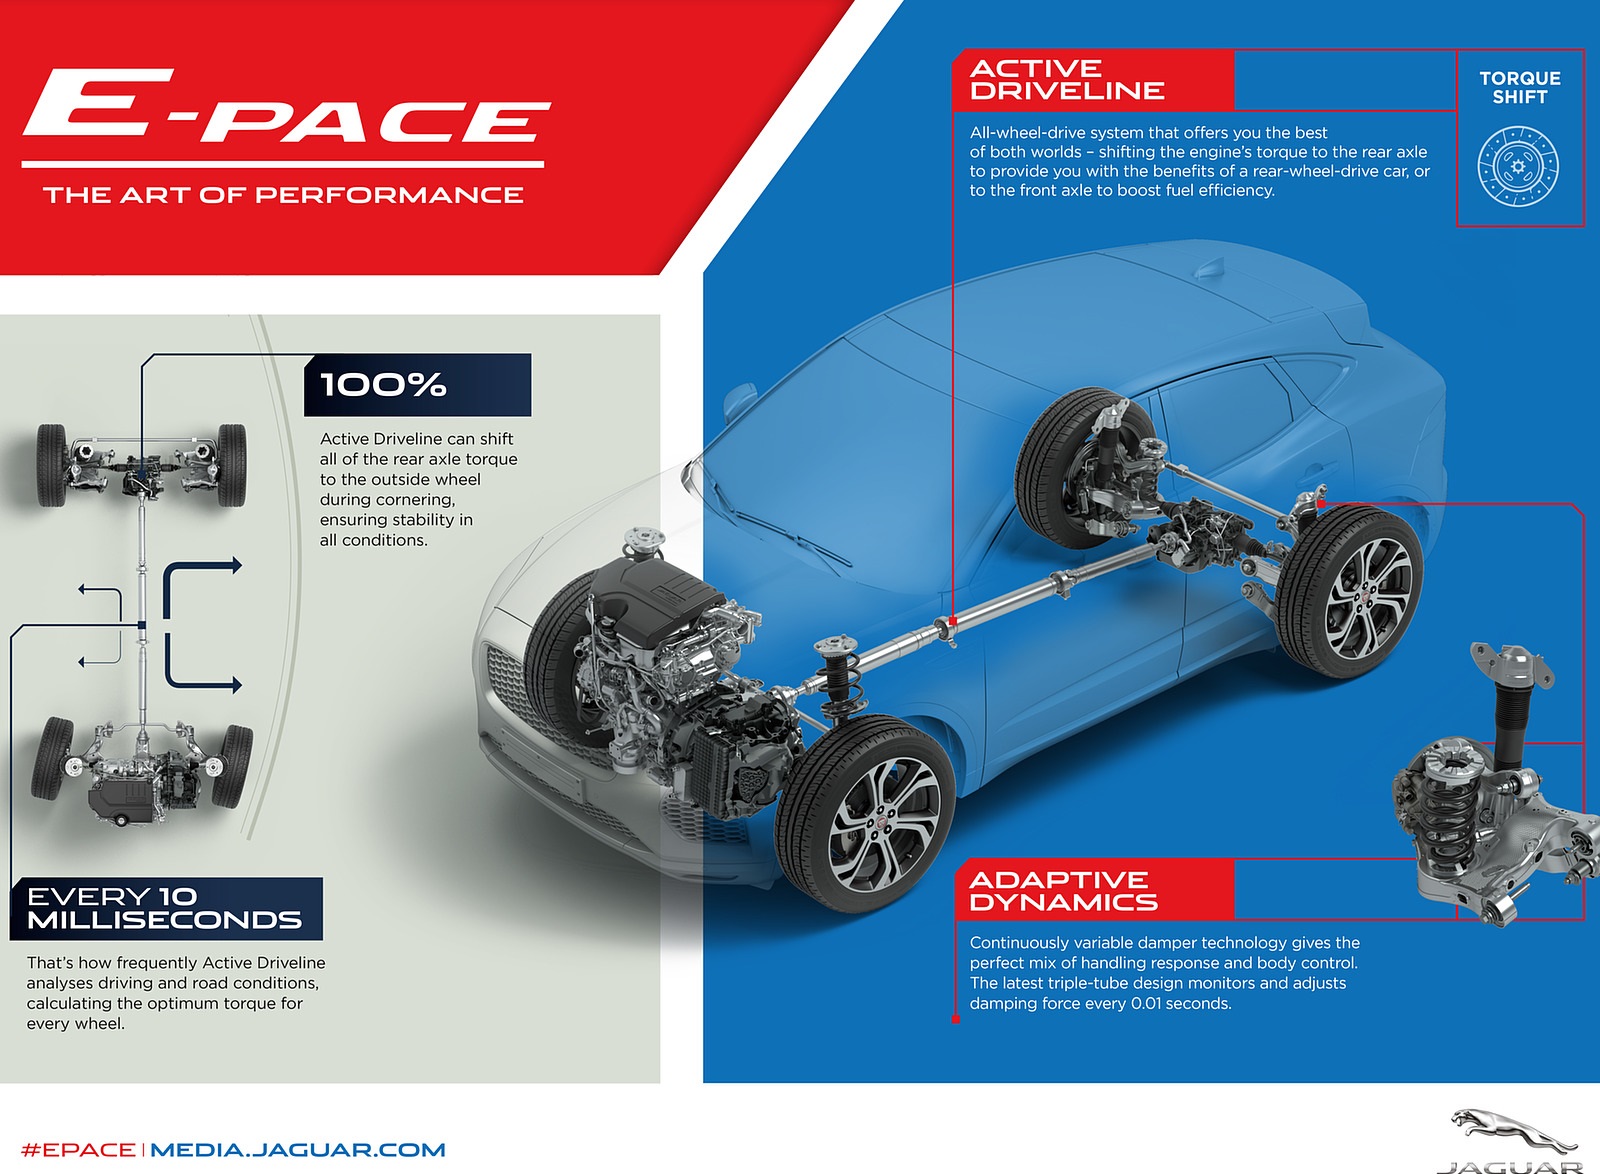 2018 Jaguar E-PACE Infographic Wallpapers #91 of 100